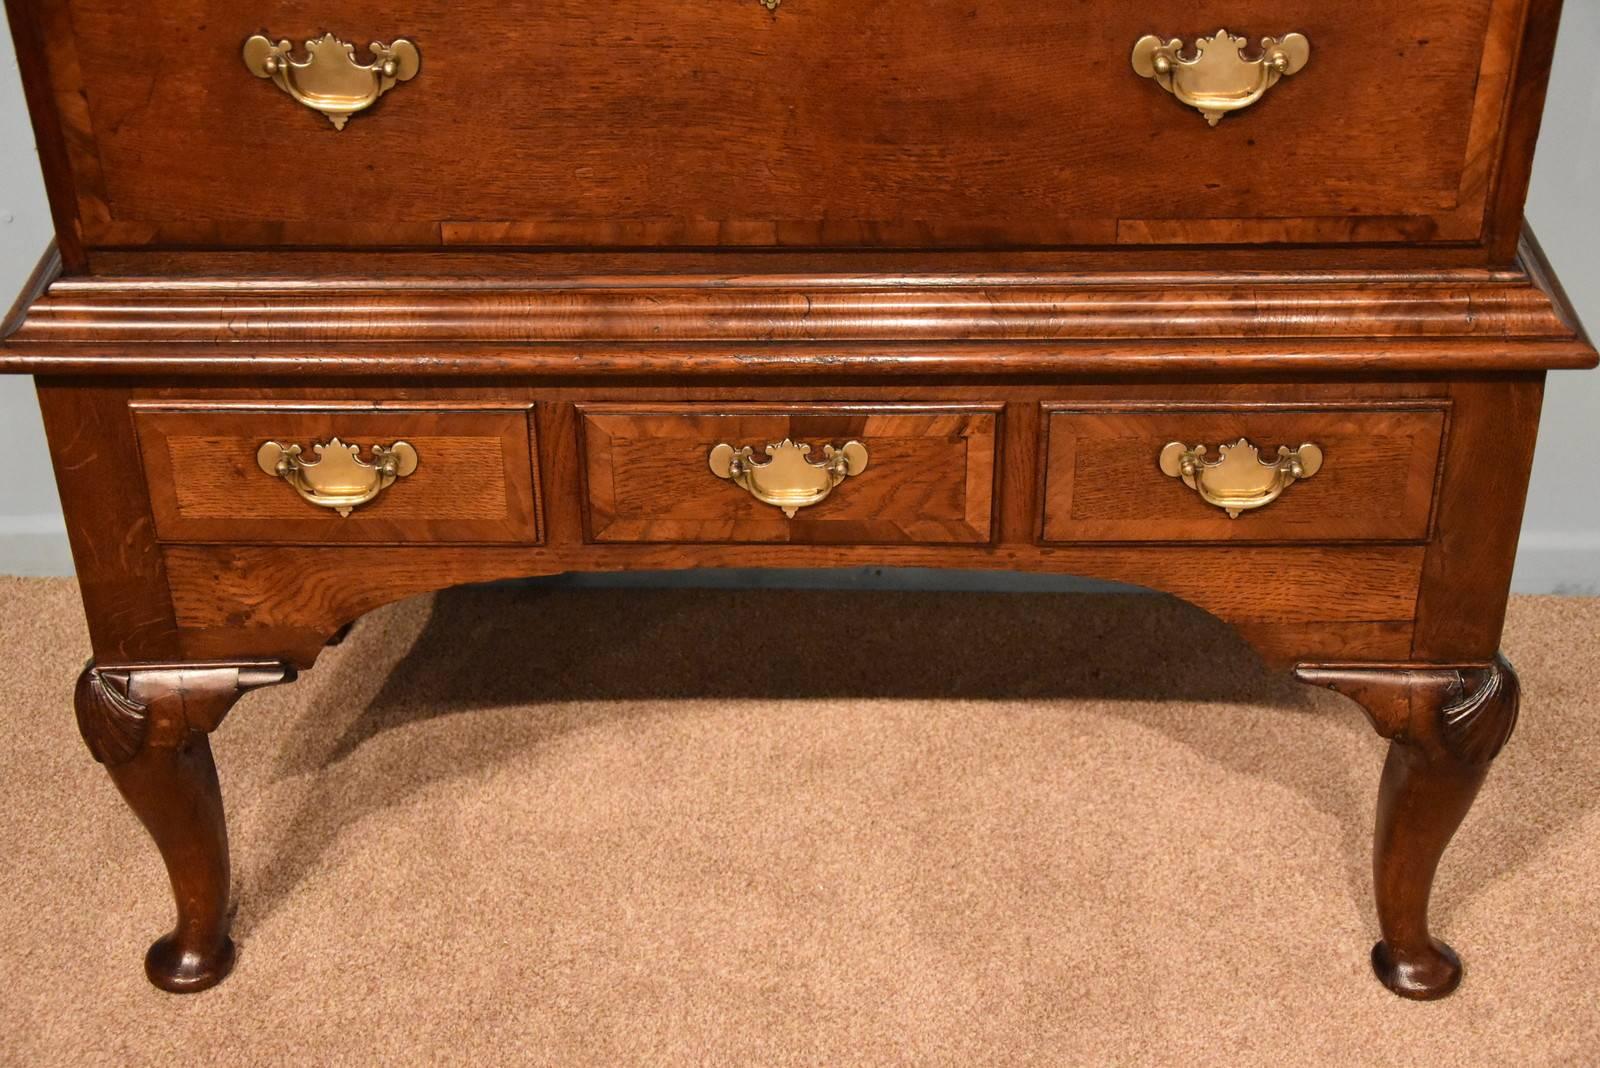 A George II oak chest on stand raised upon cabriole legs with walnut crossbanding

Dimensions
Height 61